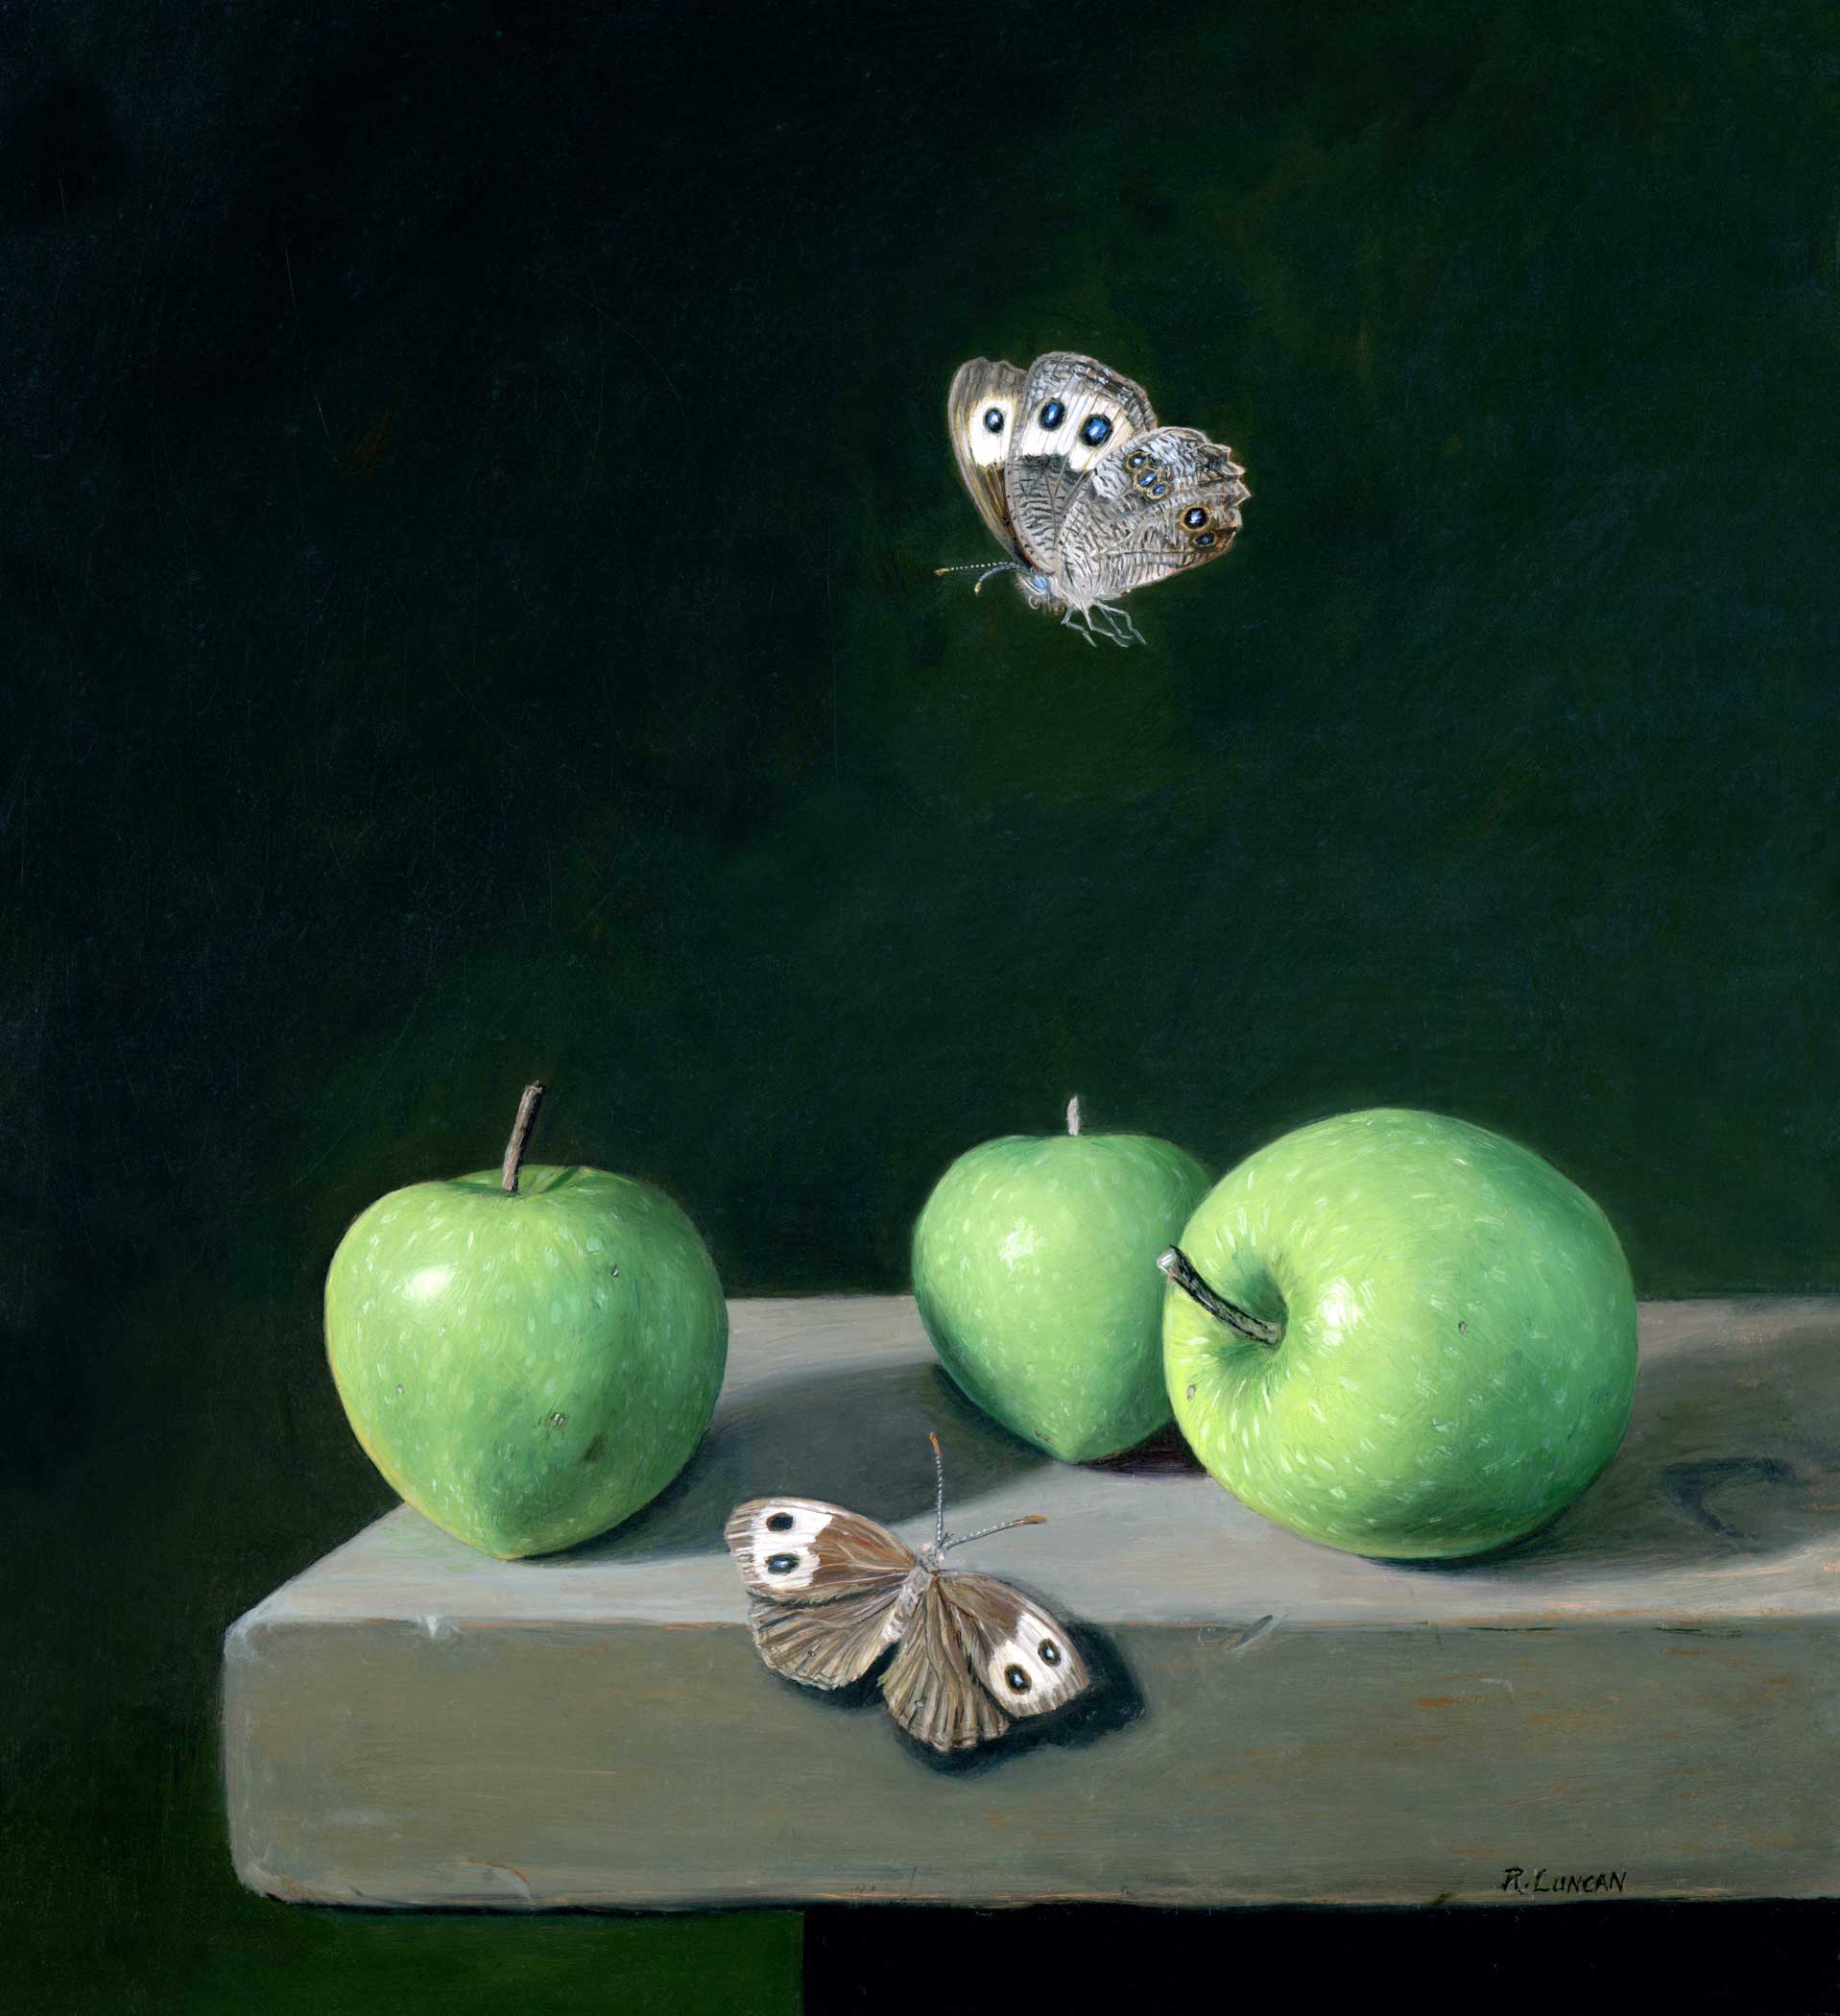 Wood Nymphs over Green Apples